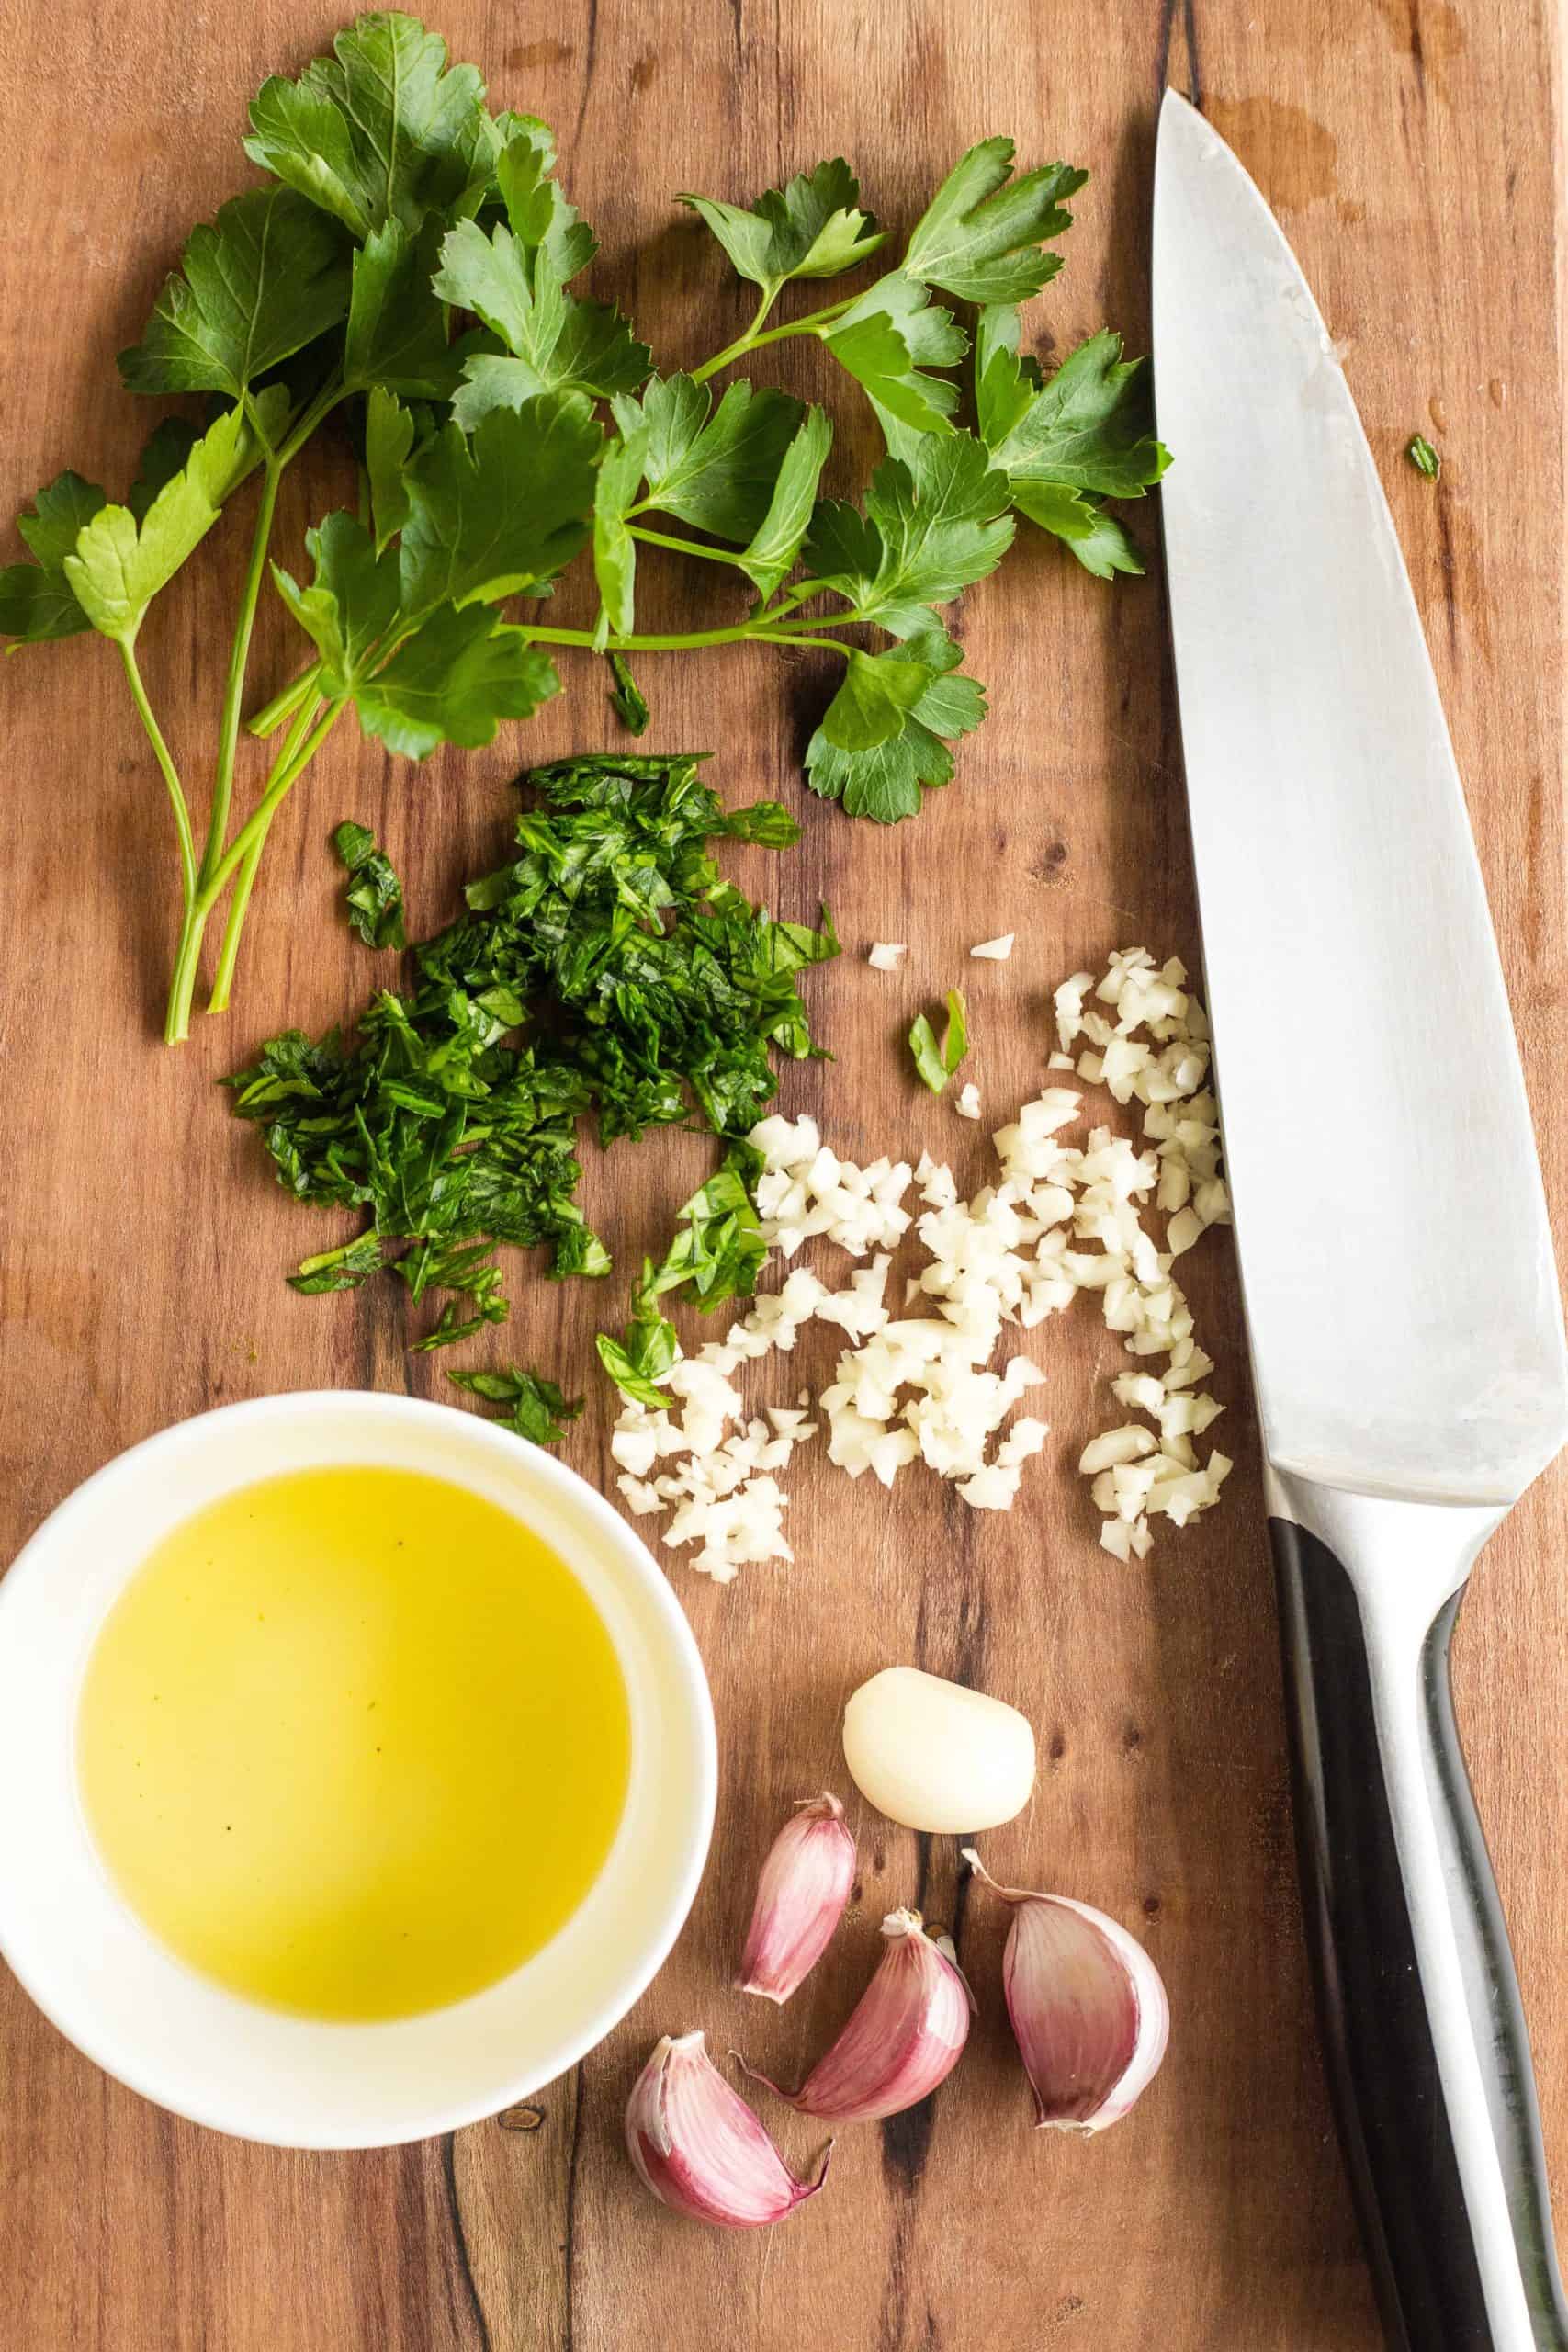 Chopped parsley, garlic and a bowl of olive oil on a wooden board.